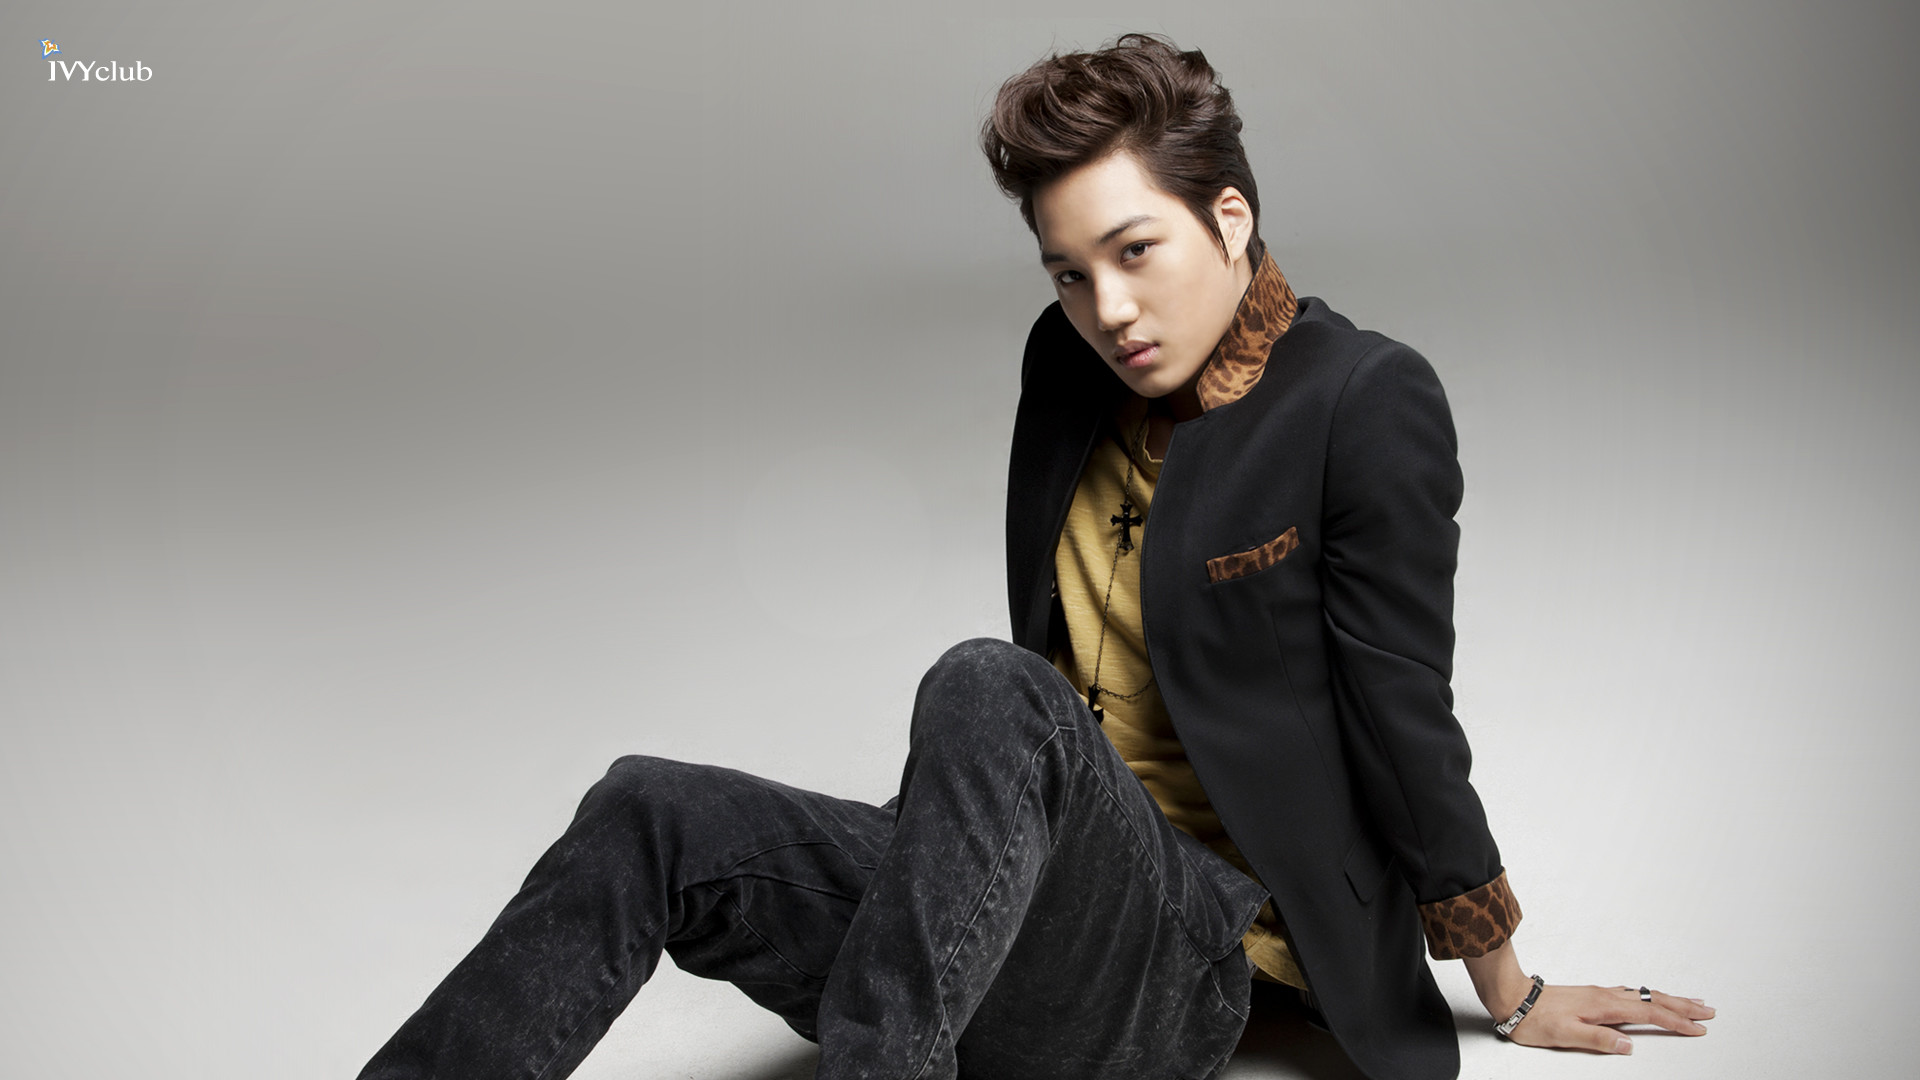 1920x1080 HD Wallpaper and background photos of â¥Kaiâ¥ for fans of KAI (EXO-K) images.